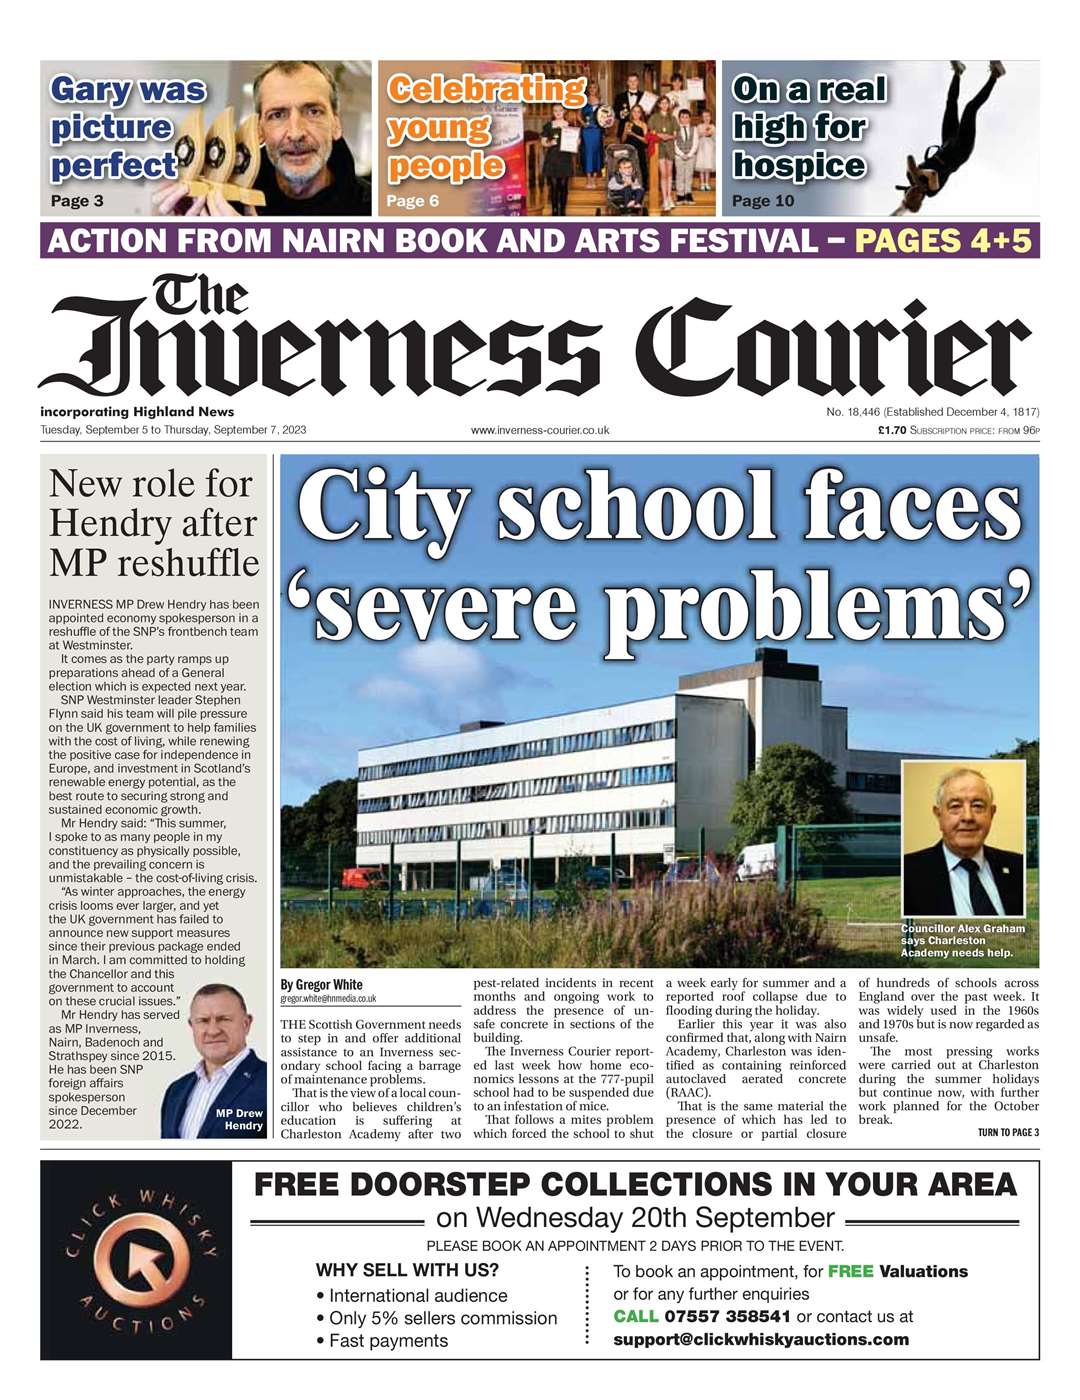 The Inverness Courier, September 5, front page.